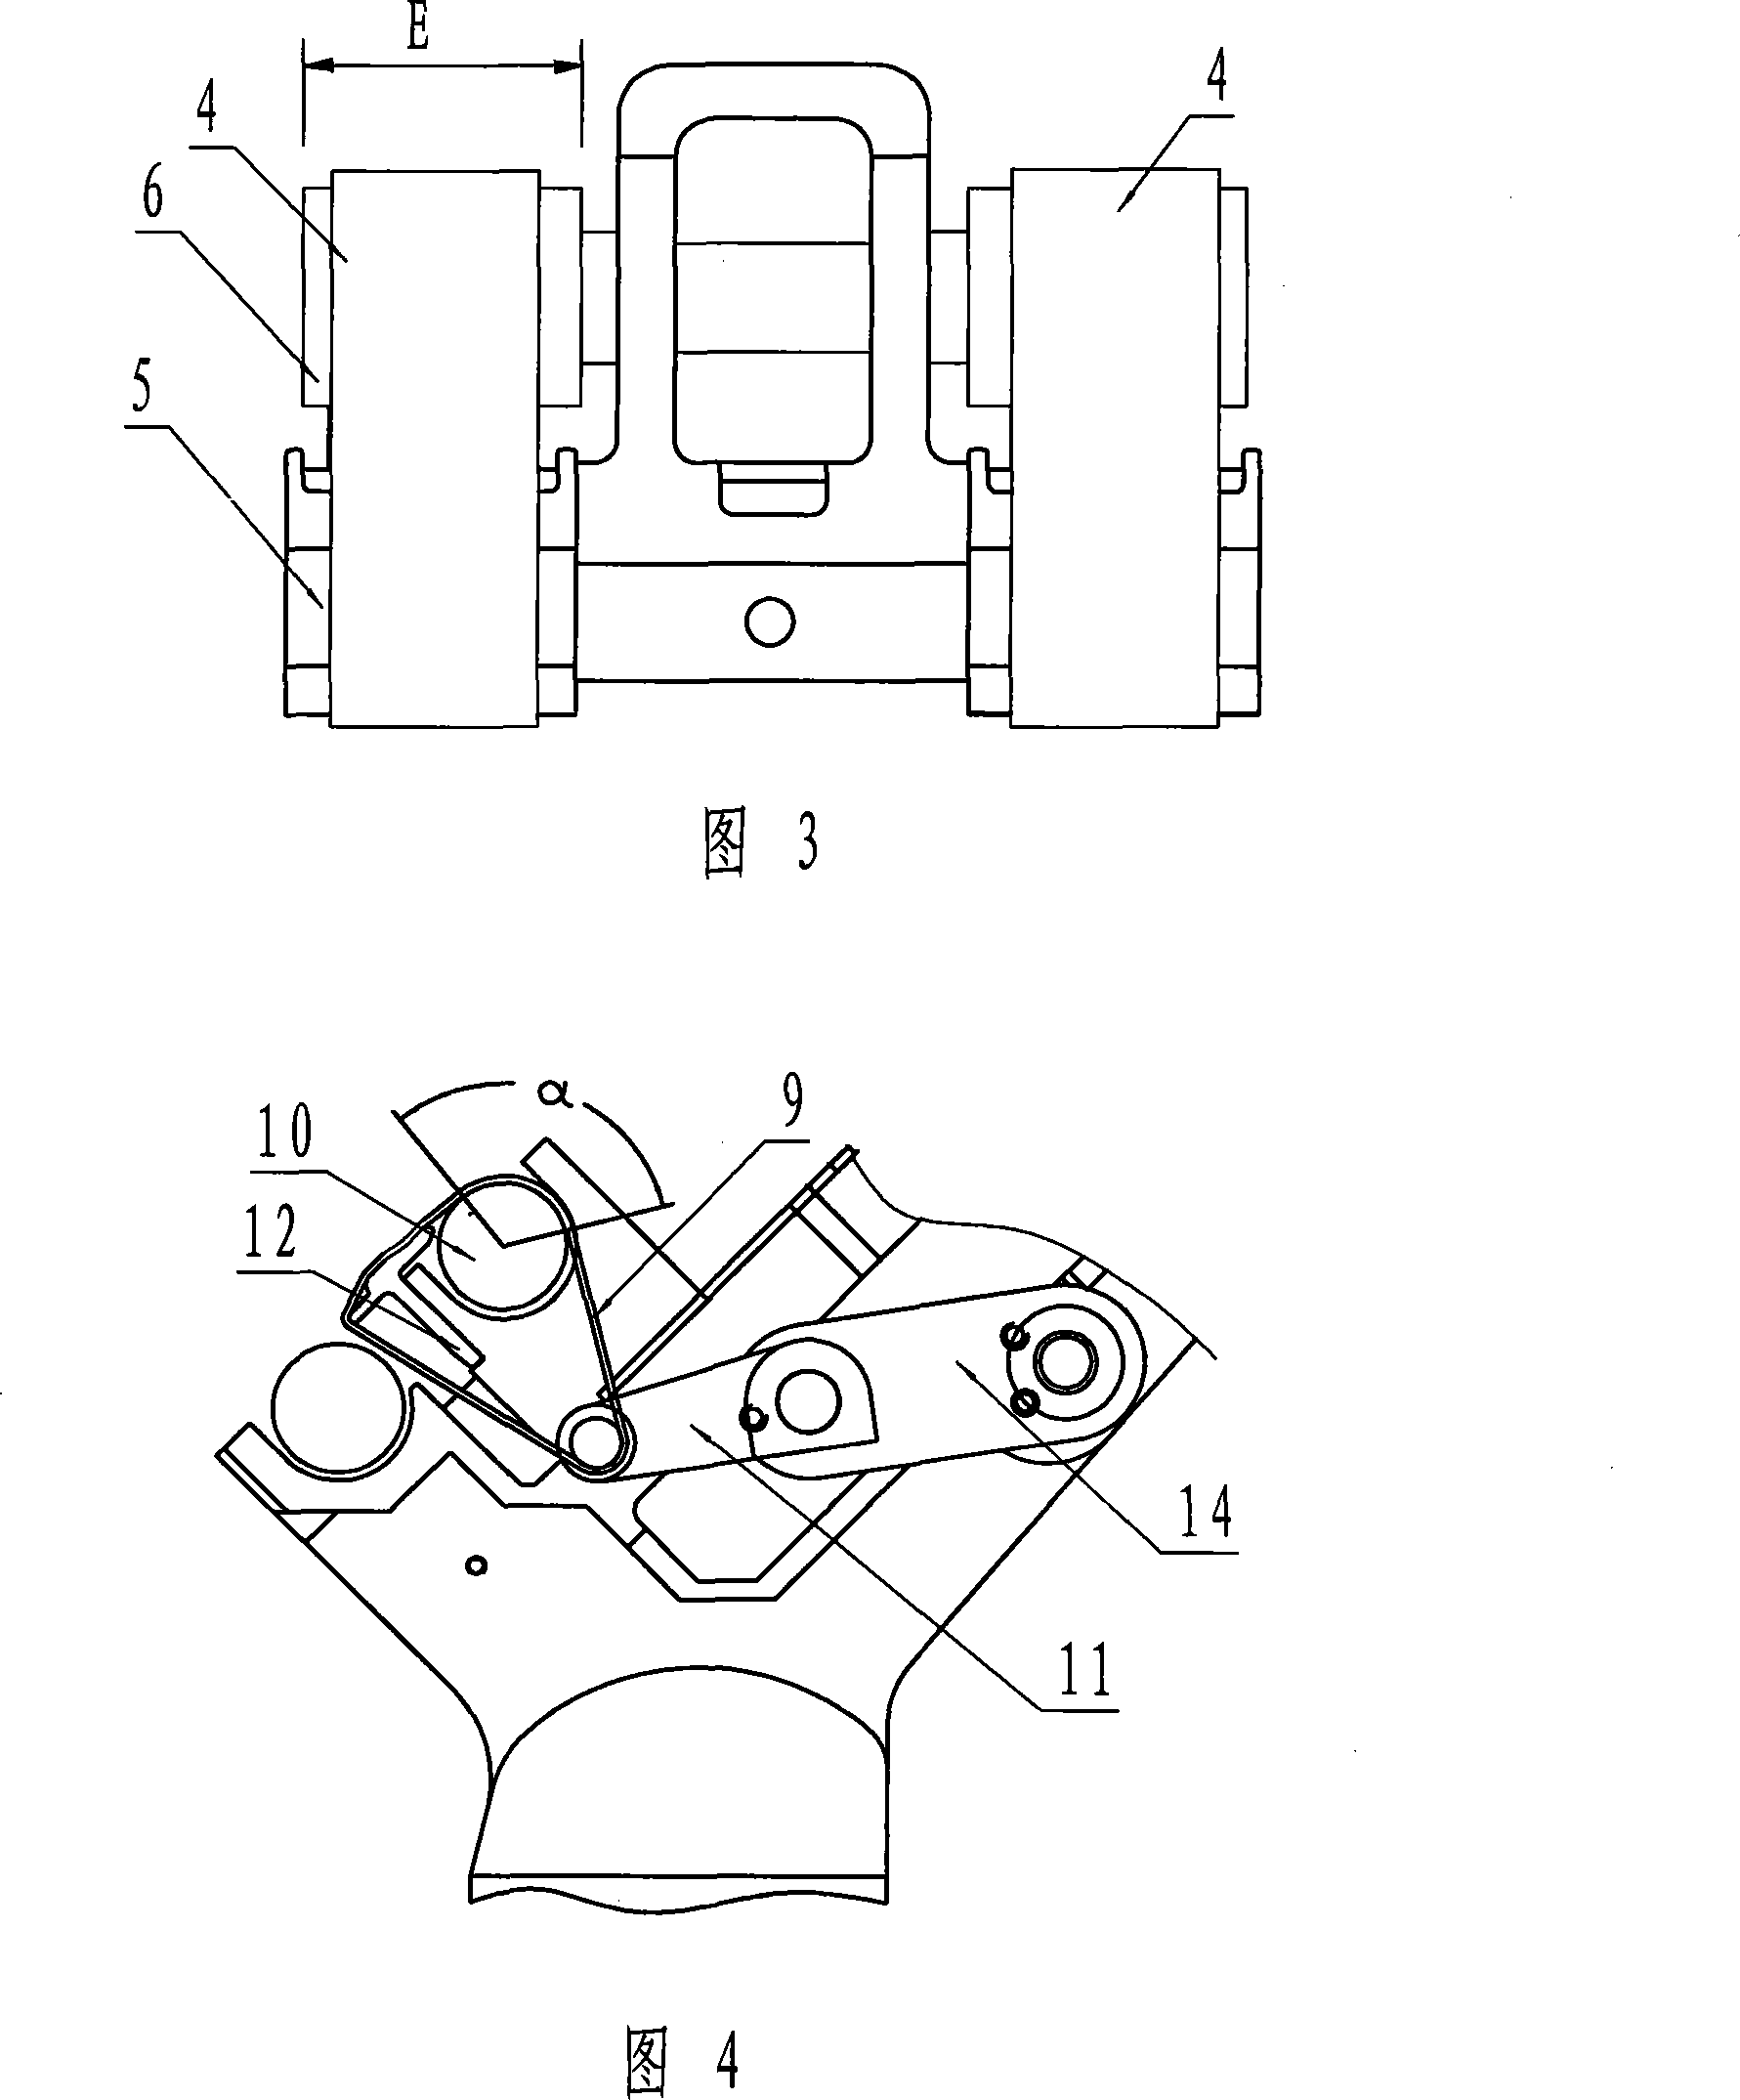 Drafting assembly of spinning machine